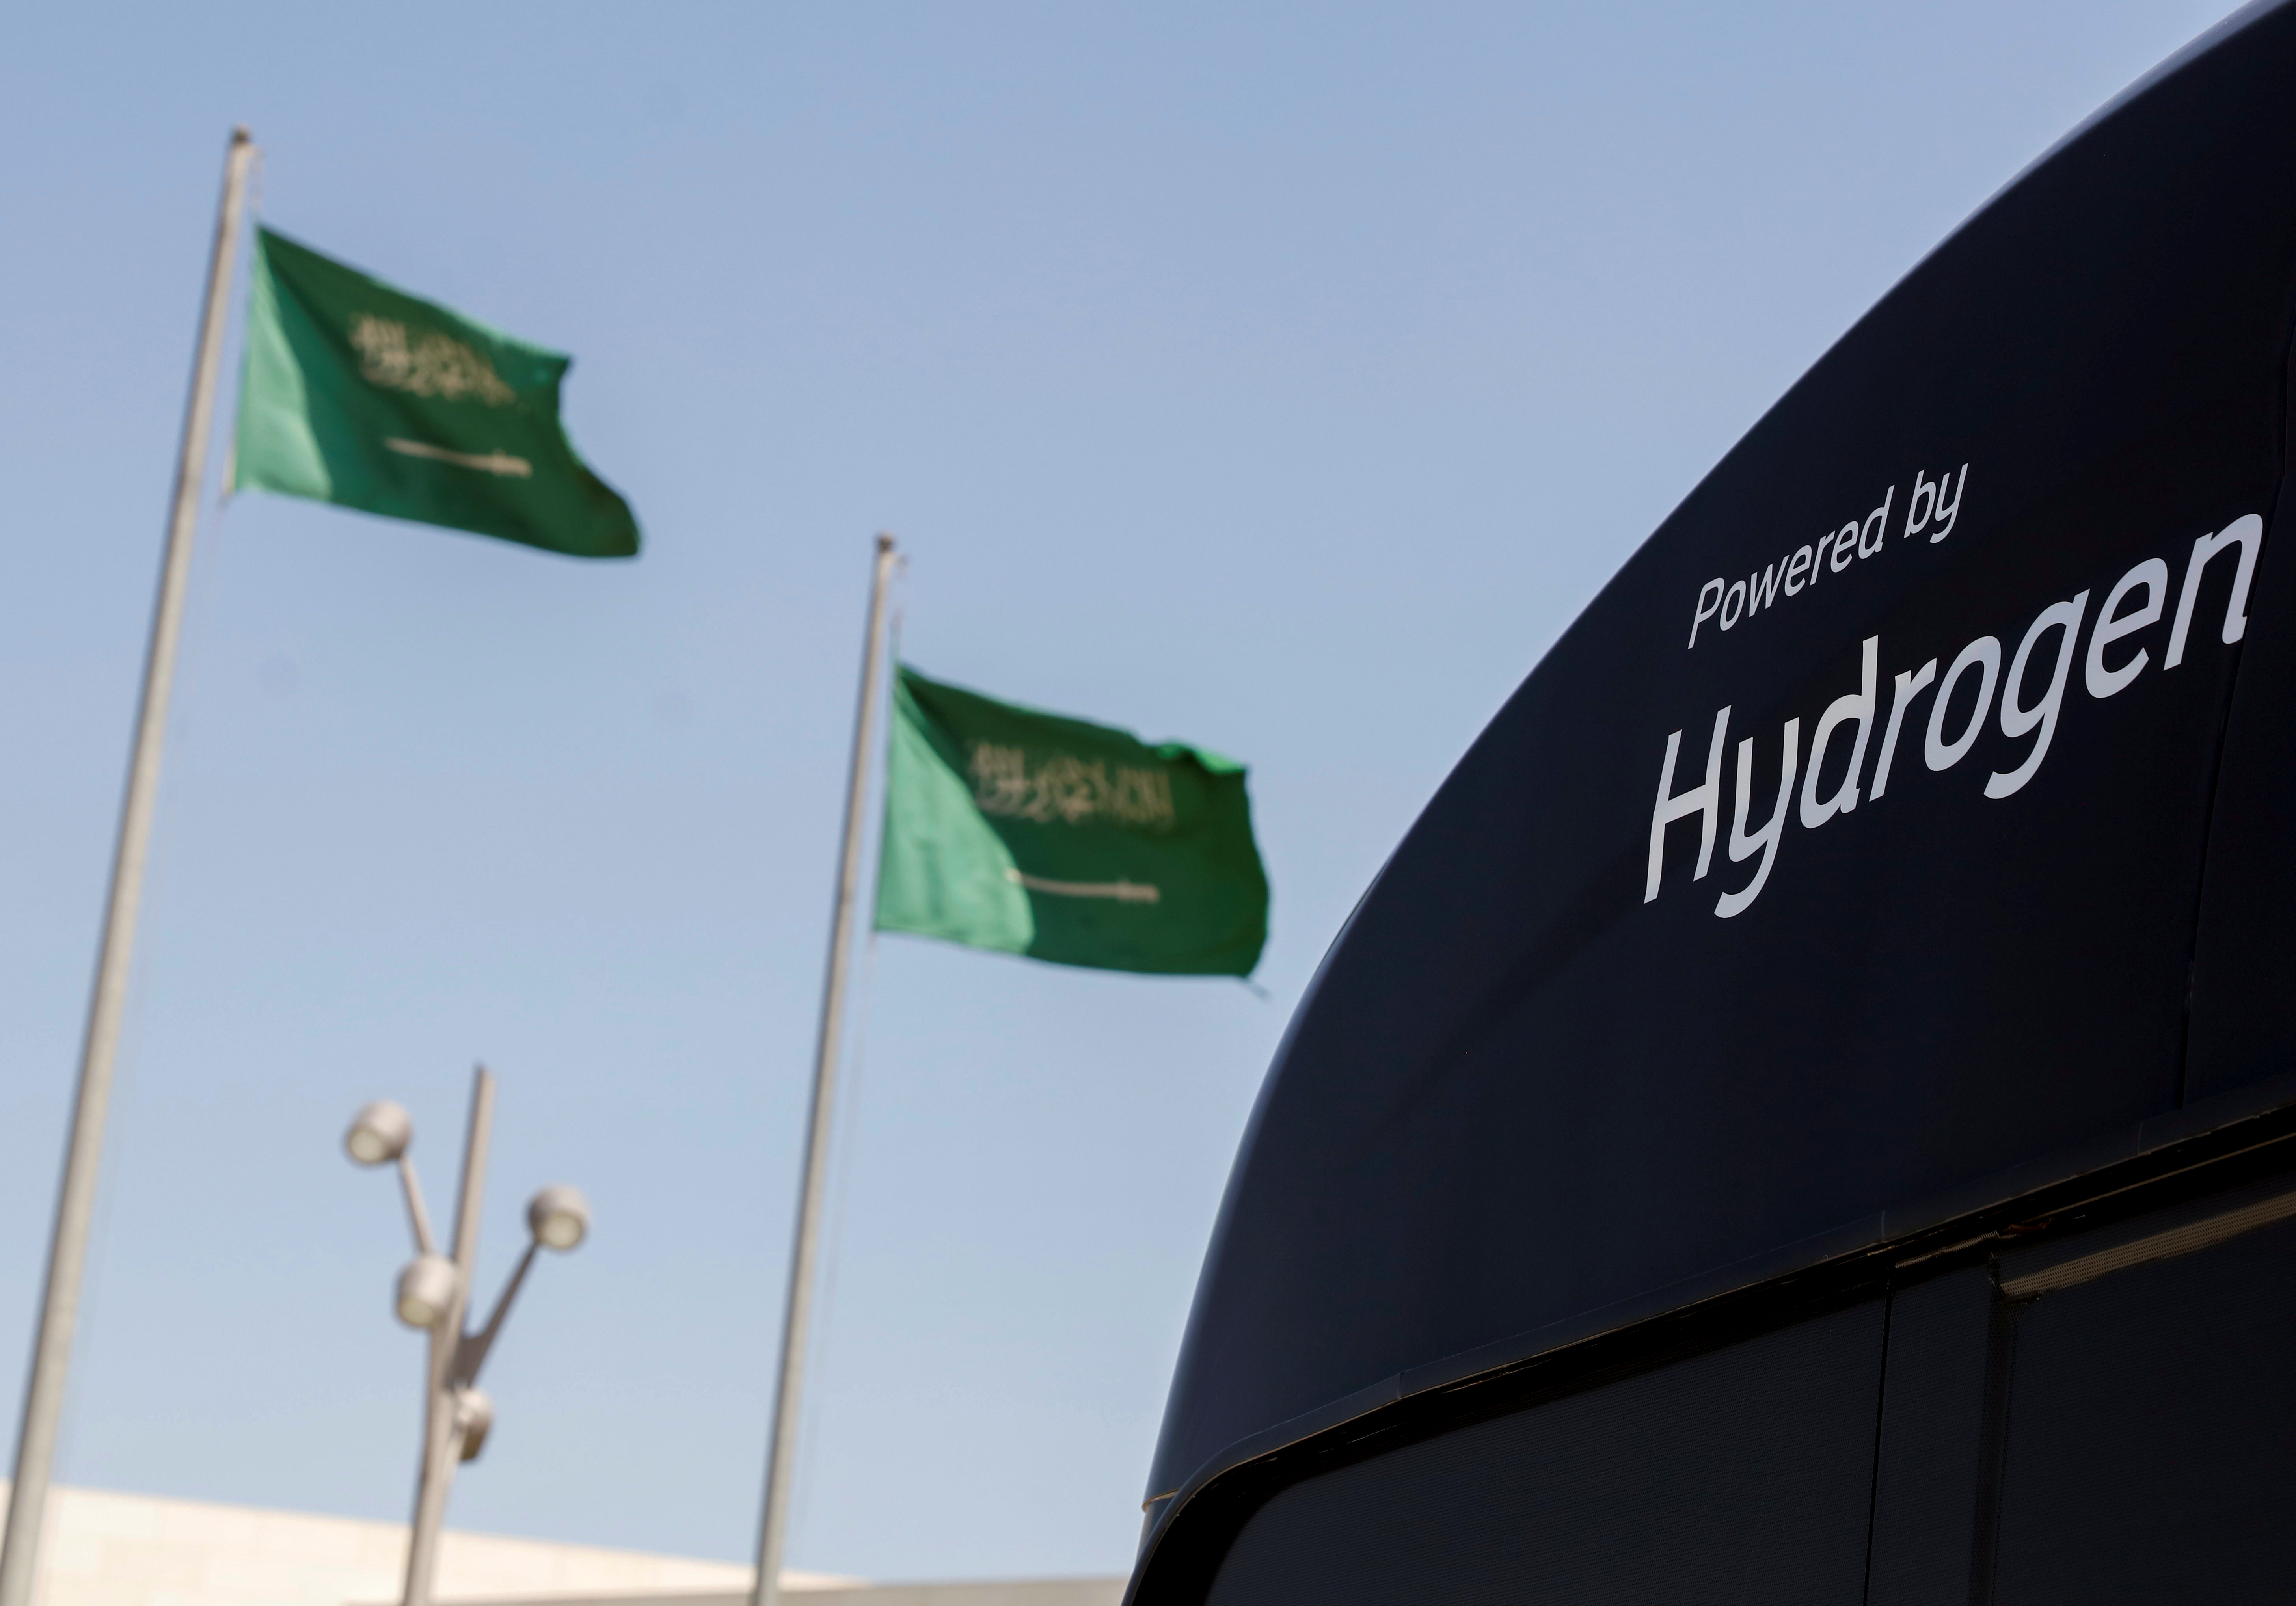 Hydrogen powered mobile unite is seen during Saudi Aramco's media trip to demonstrate Hydrogen automotive technology at Techno Valley Science Park in Dhahran